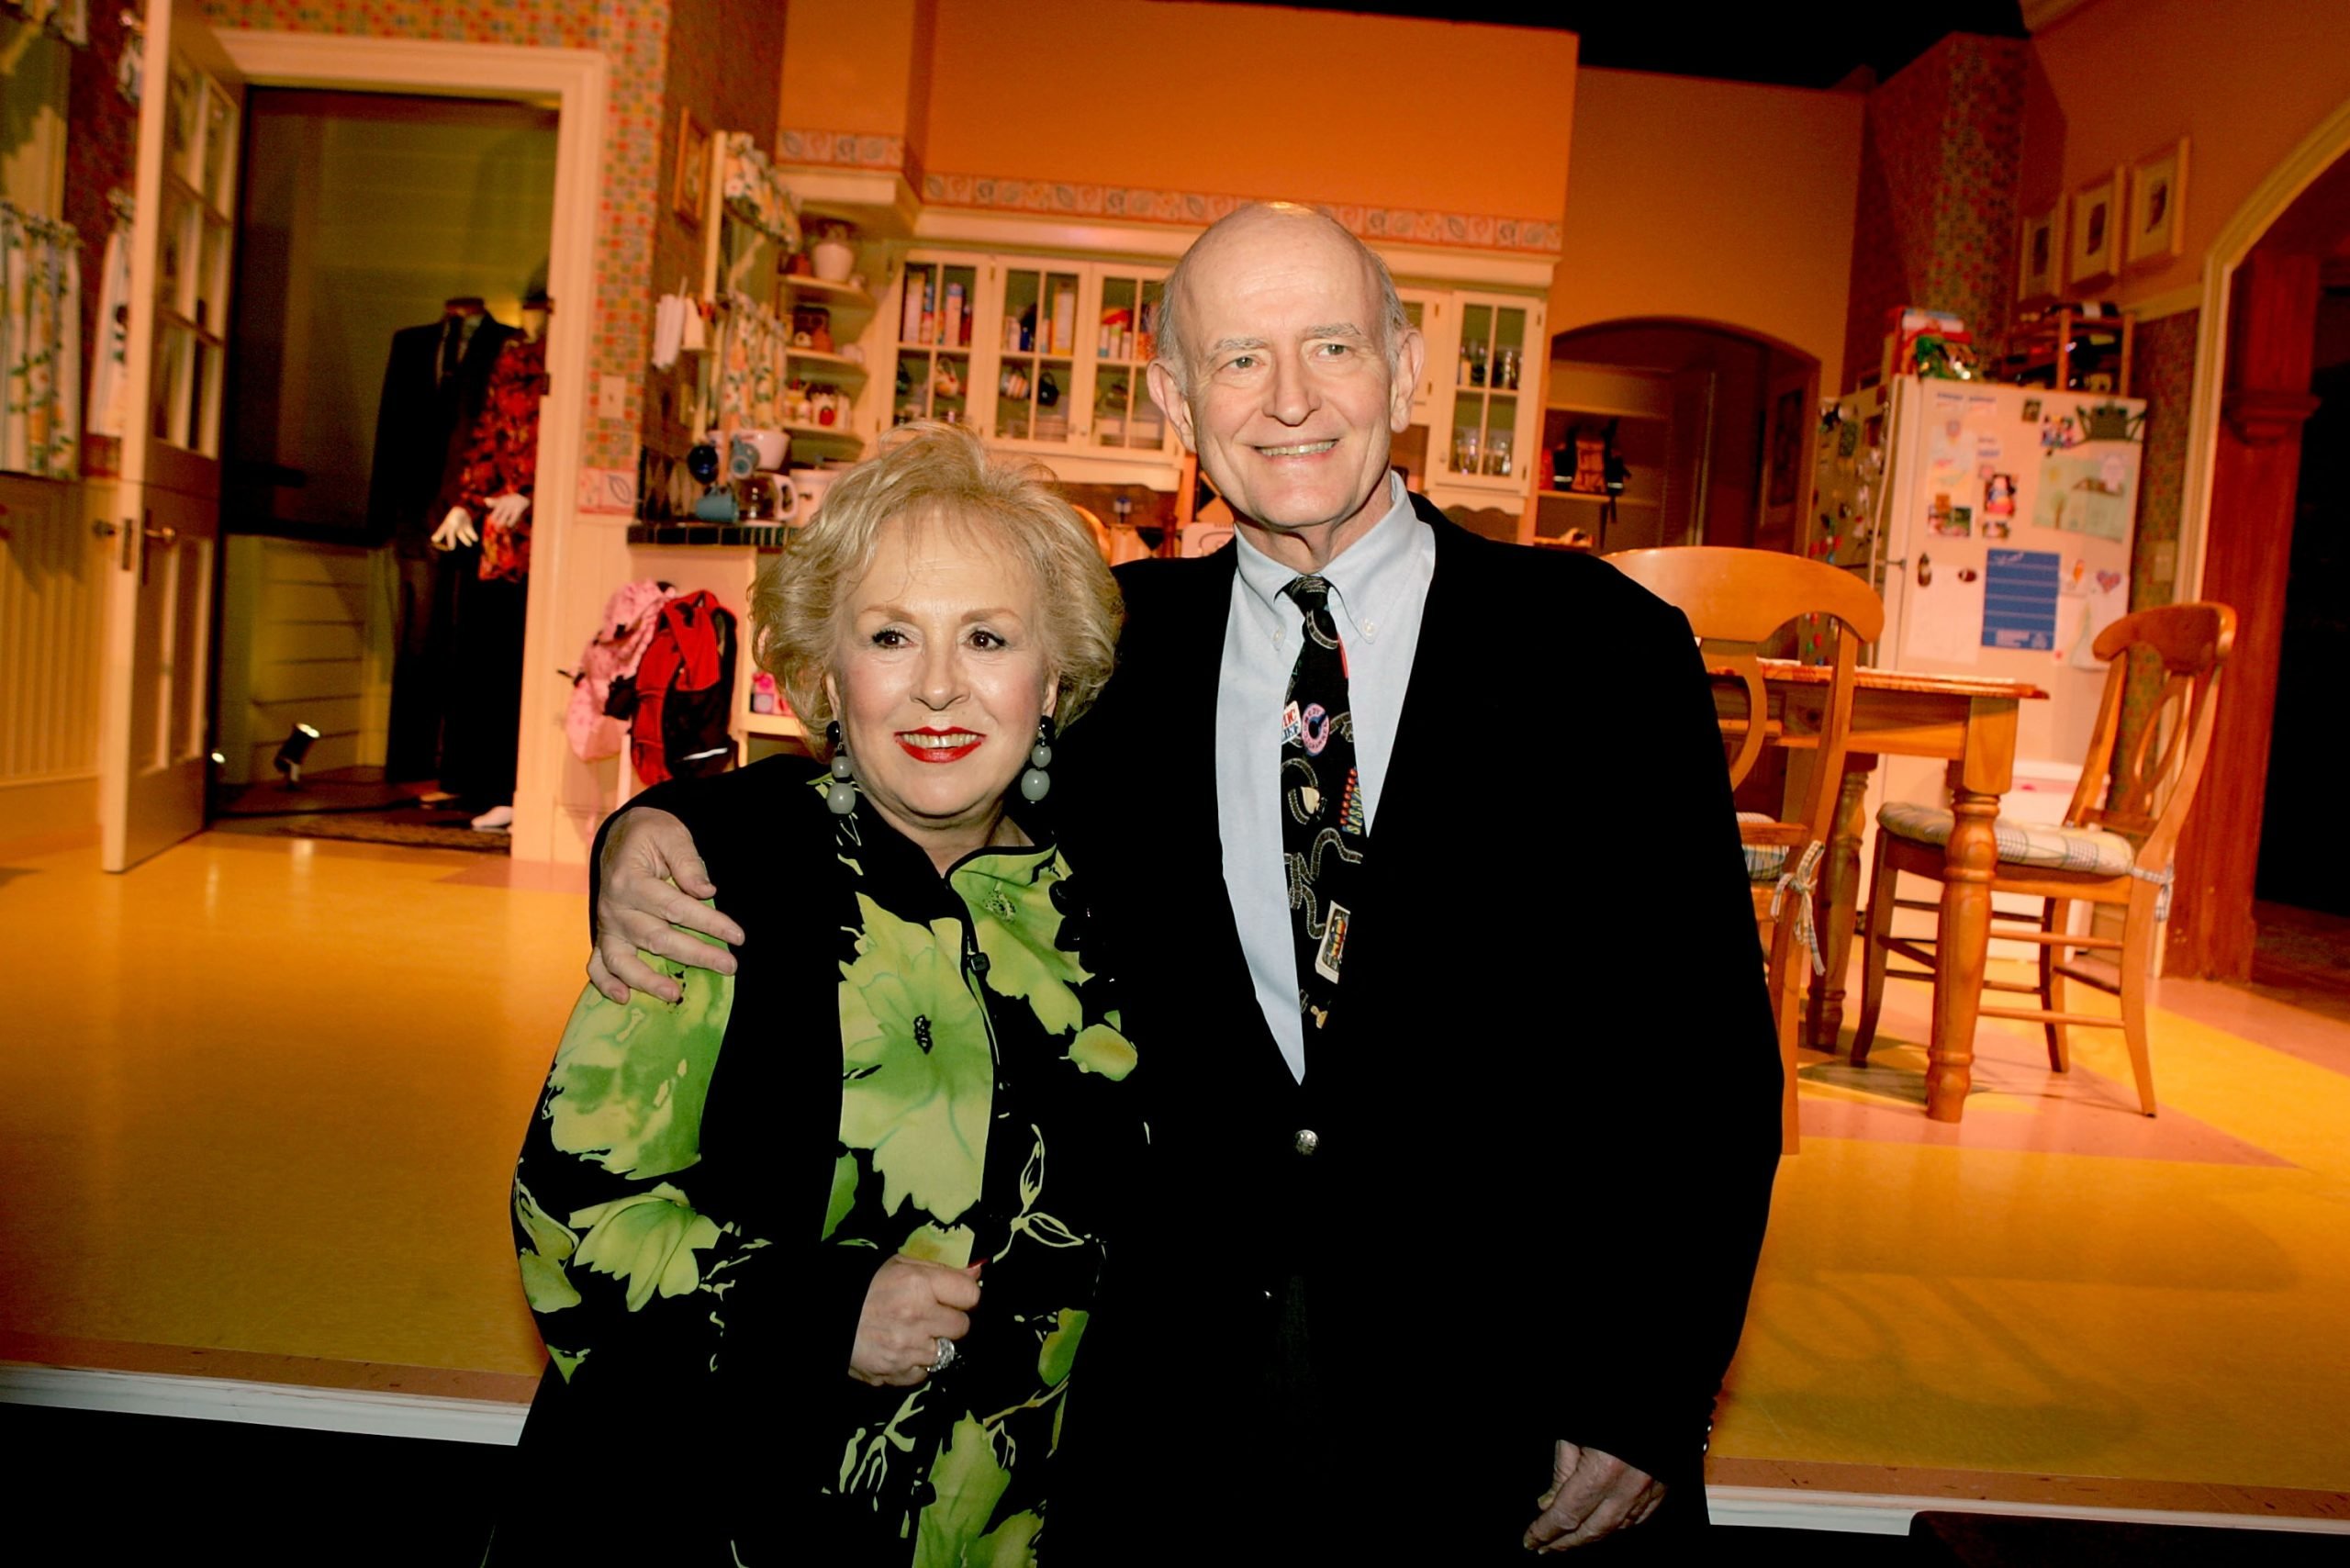 Actors Doris Roberts and Peter Boyle pose for a photo on the 'Everybody Loves Raymond' set